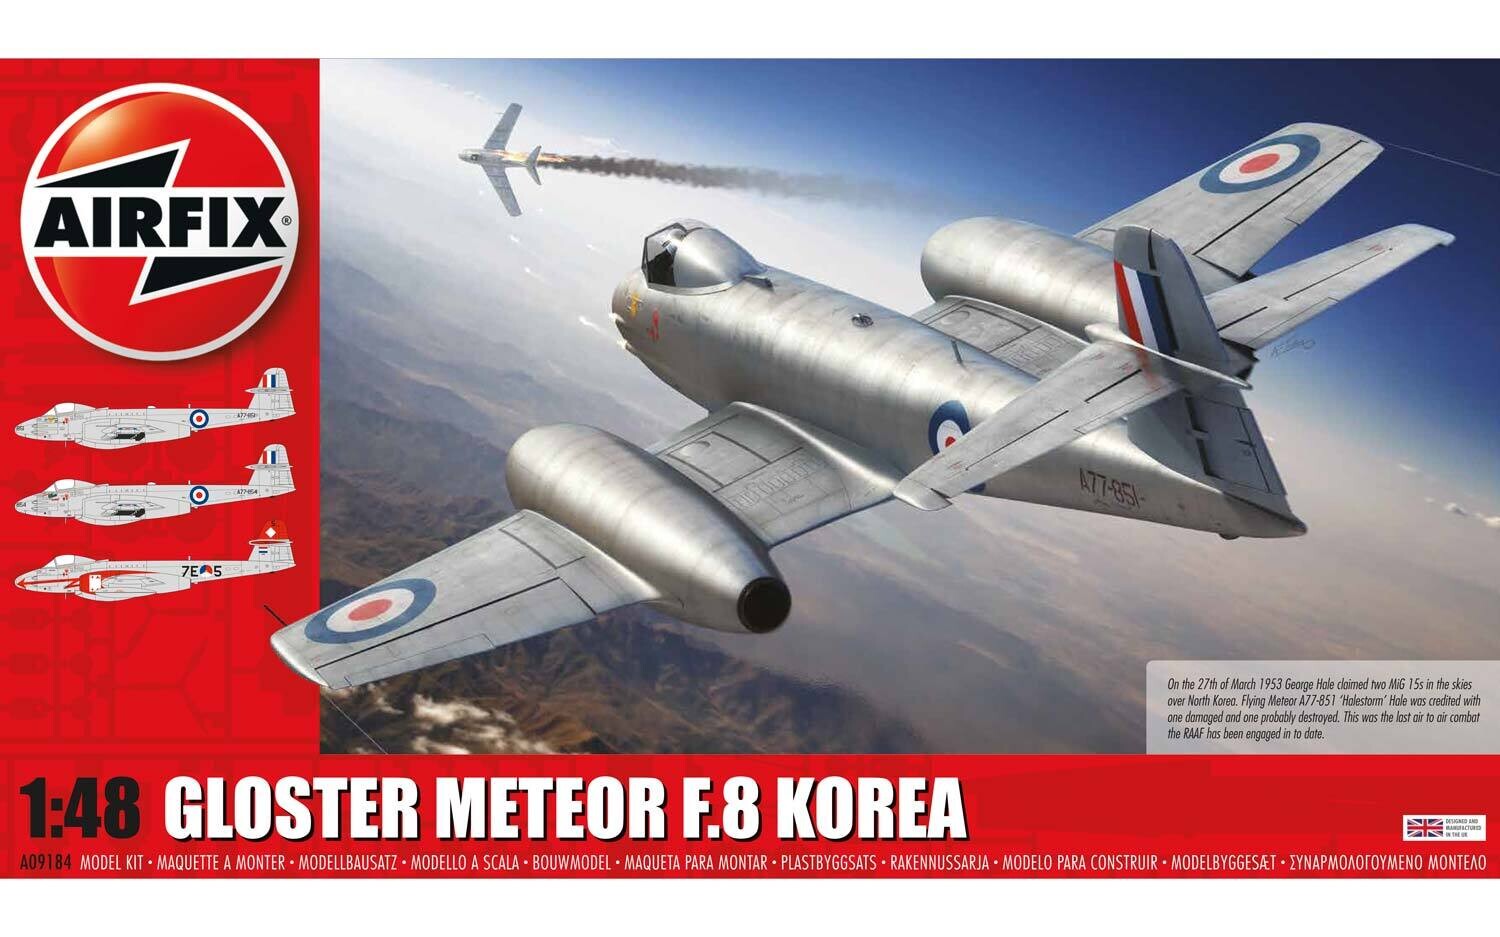 Airfix A09184 Gloster Meteor F.8 Korea 1:48 Scale Plastic Model Kit